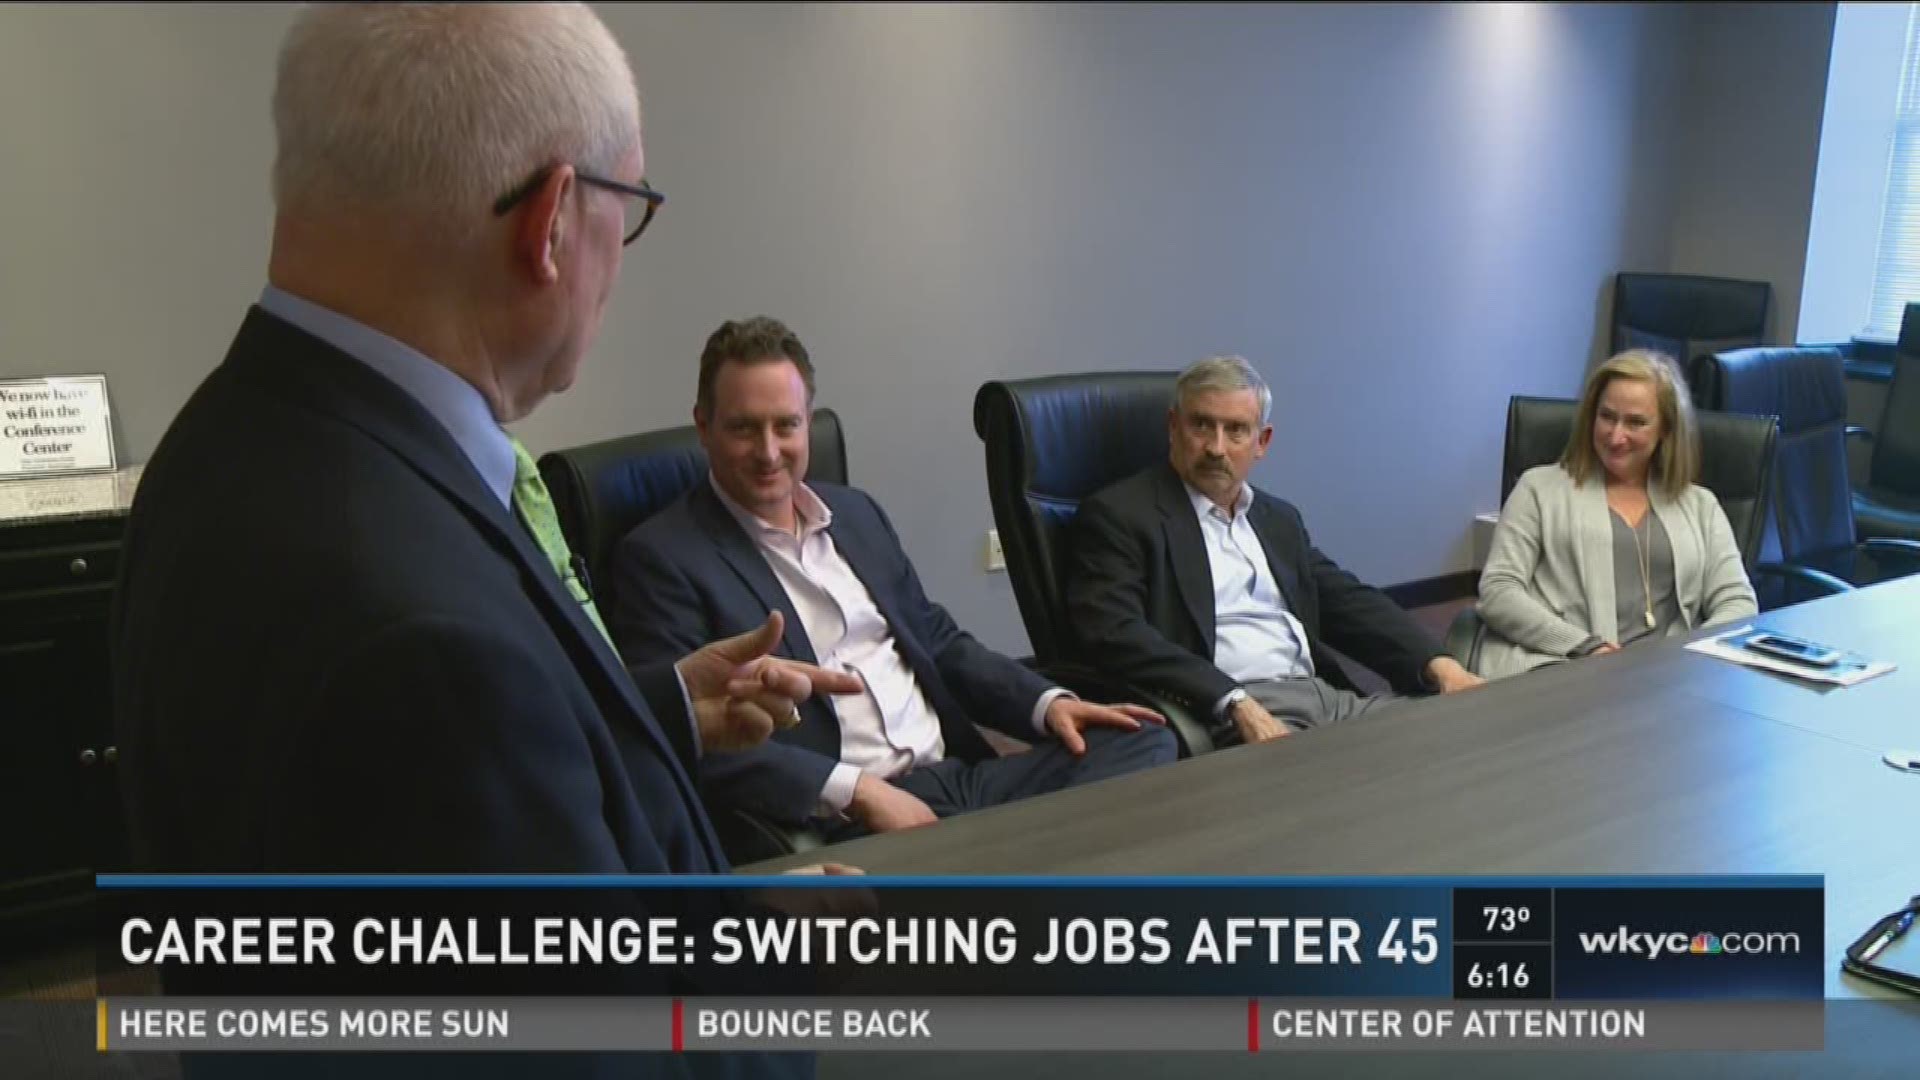 Career challenge: Switching jobs after 45